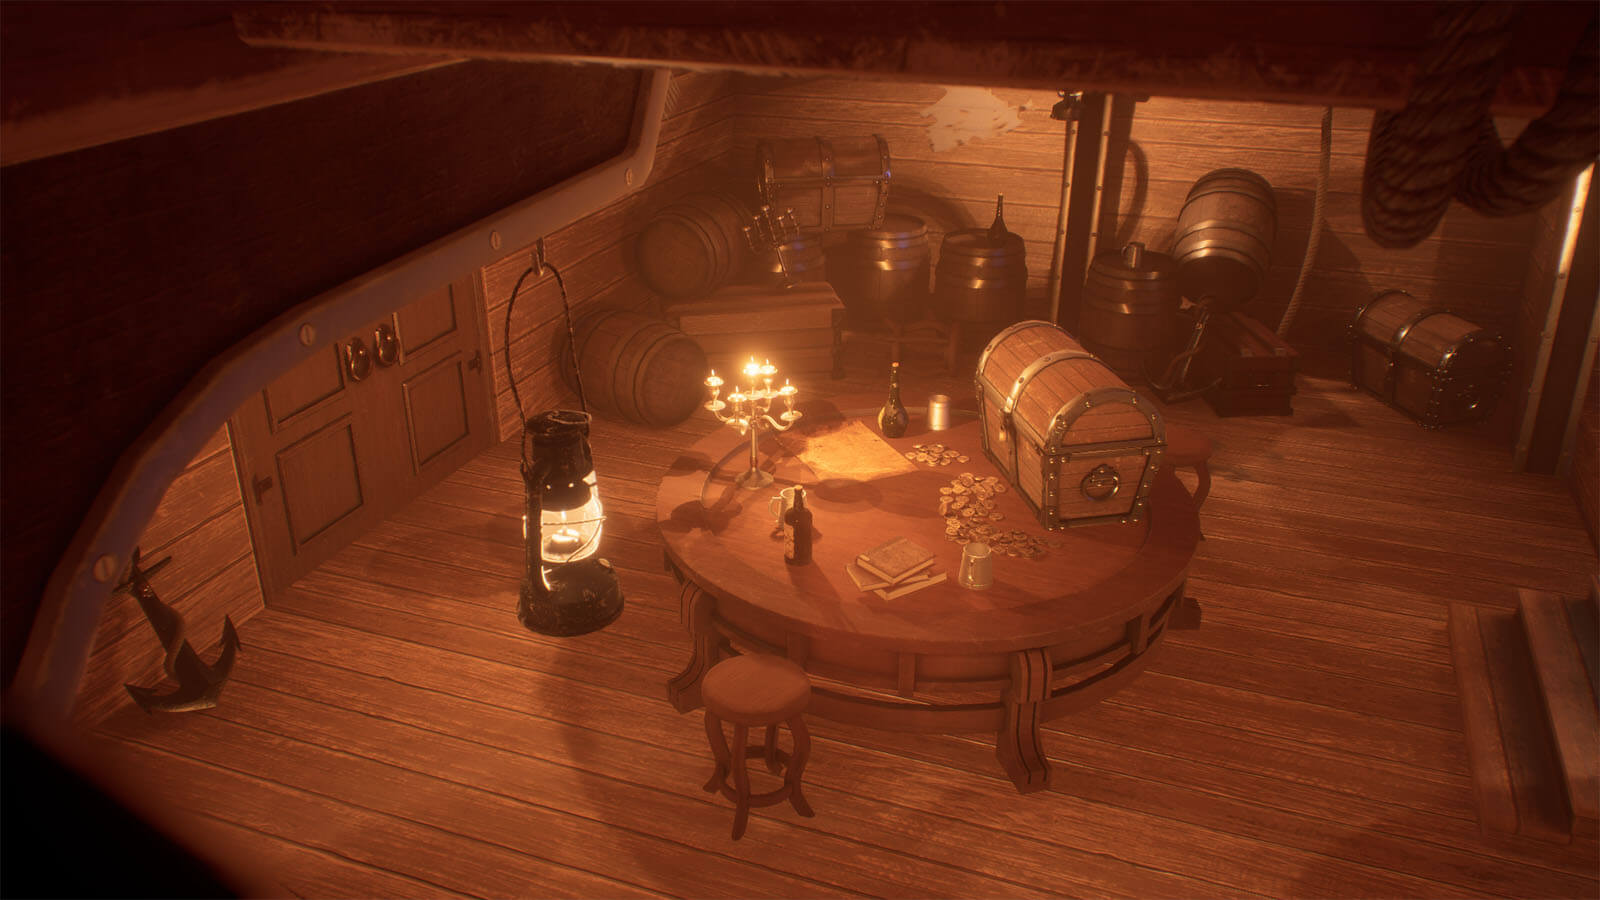 Overhead view of pirate's inner chambers with a treasure chest and other items on a table